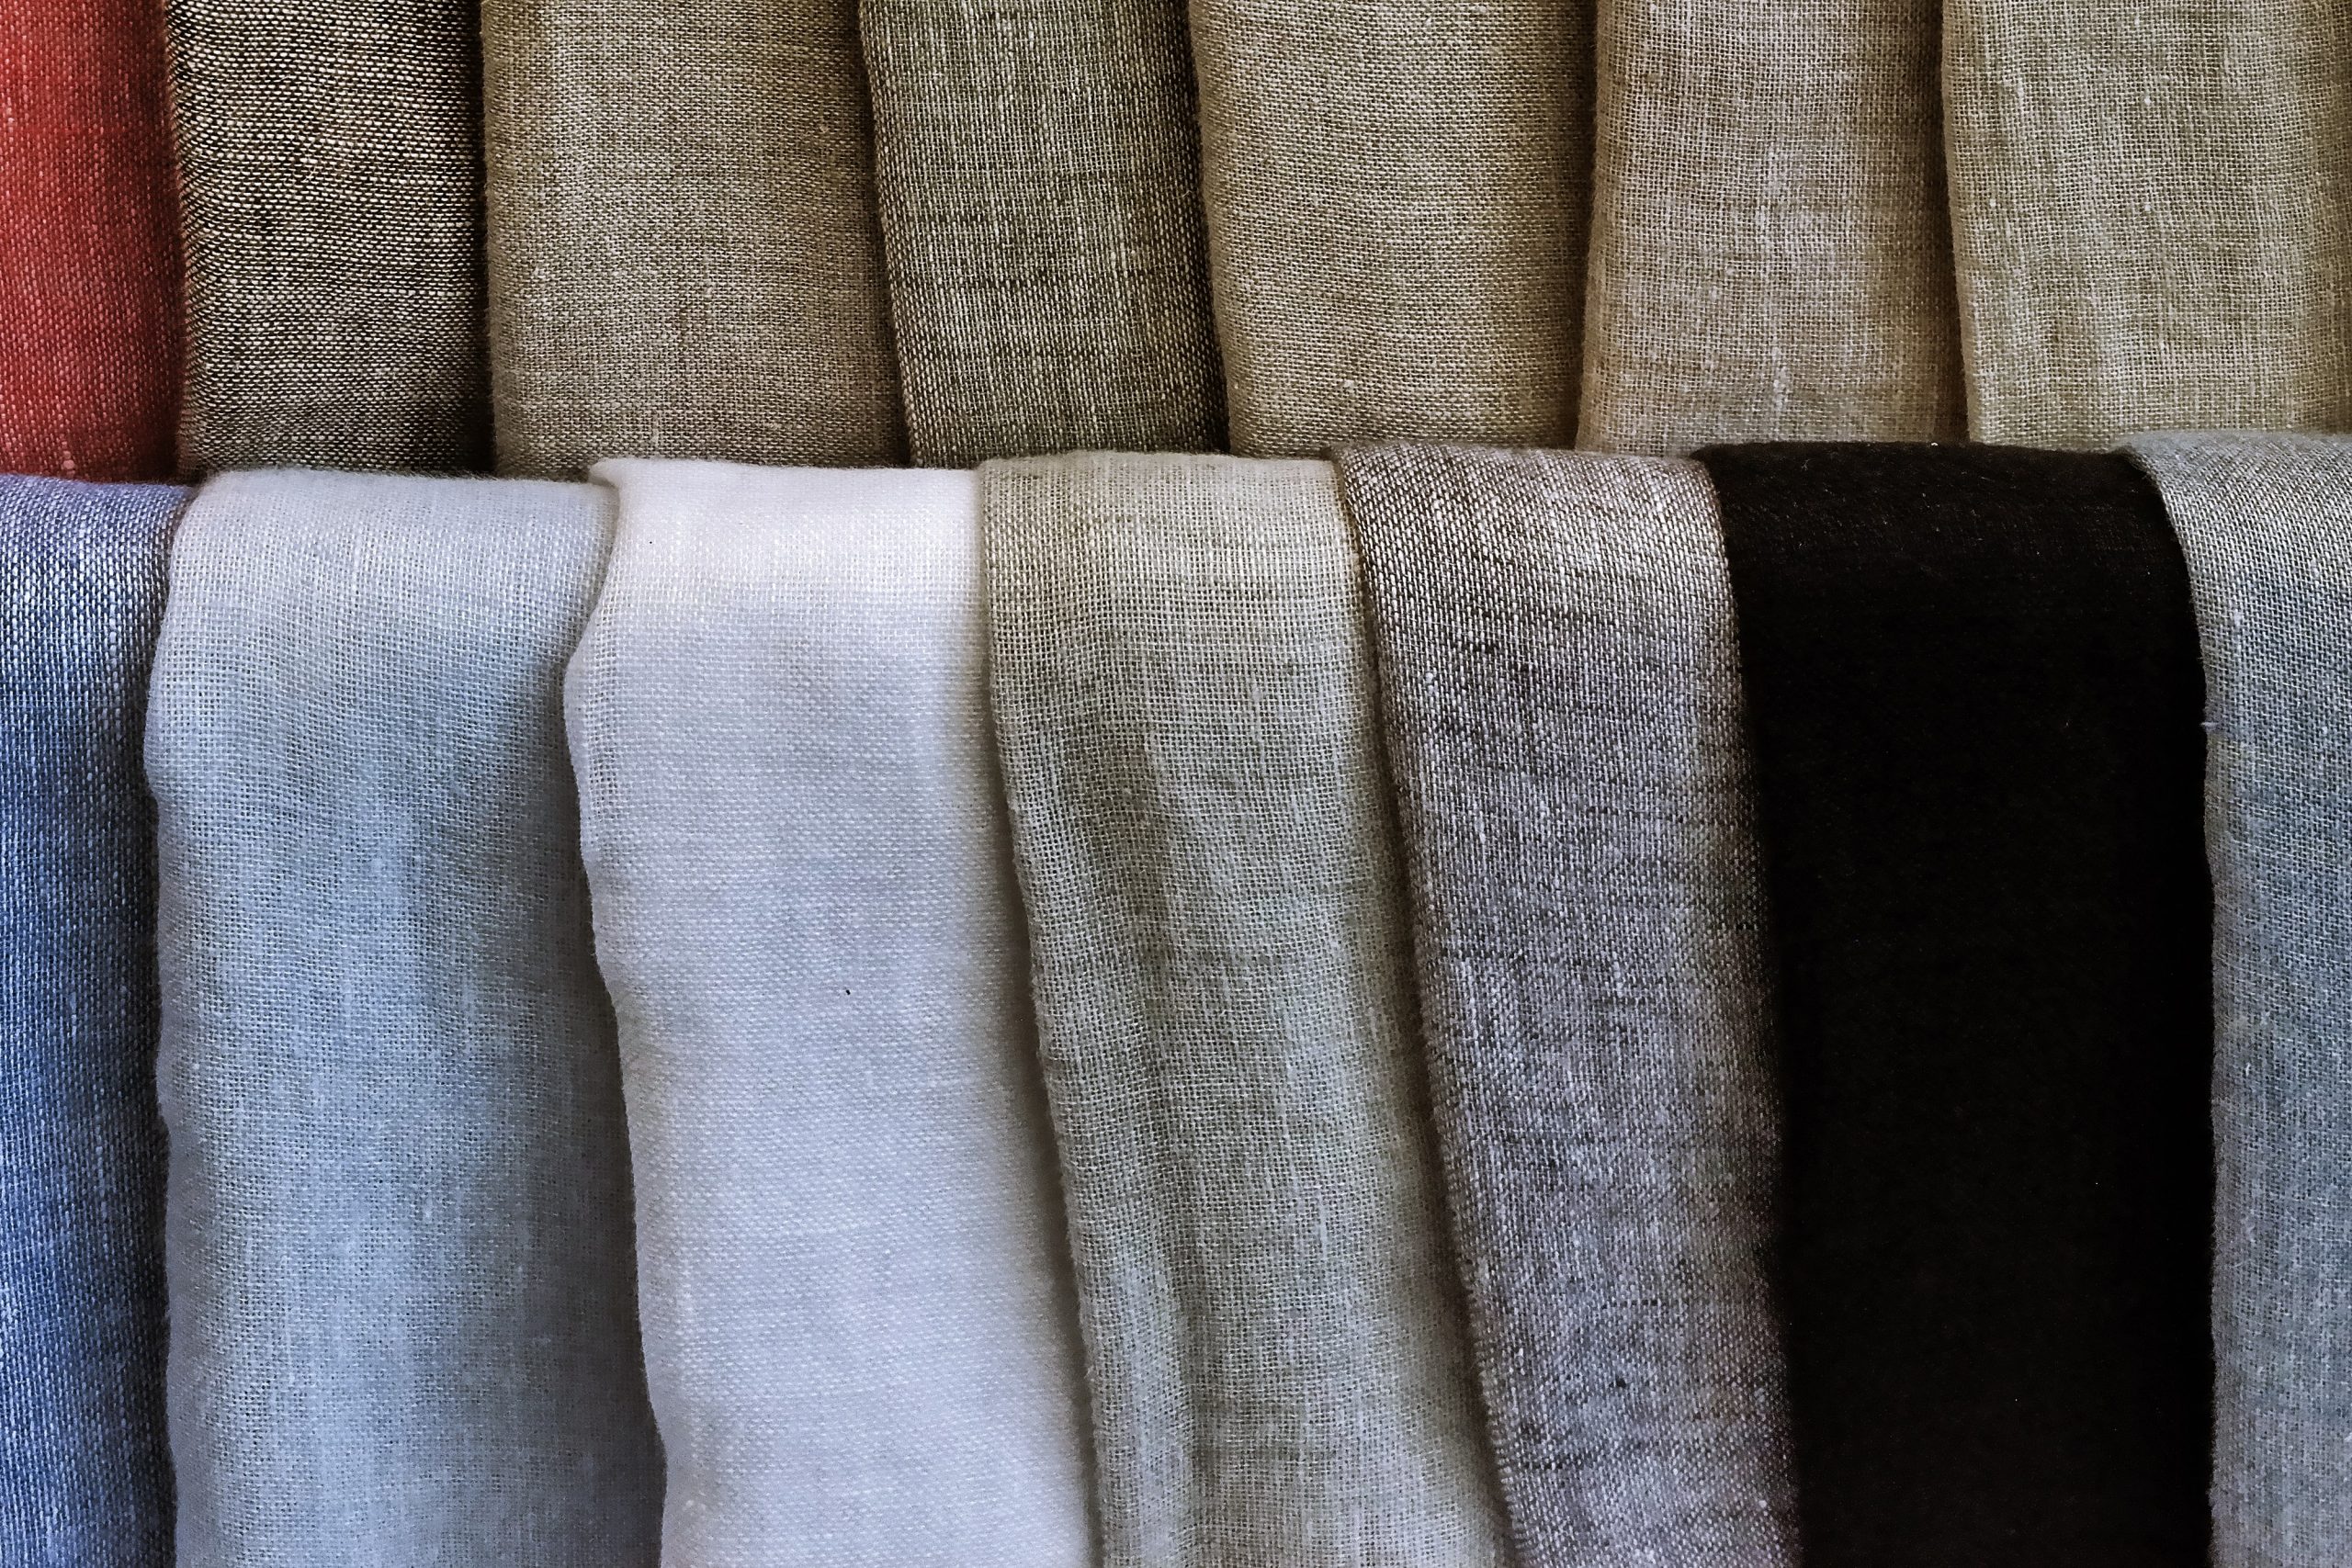 Different pieces of linen folded nicely across a few racks